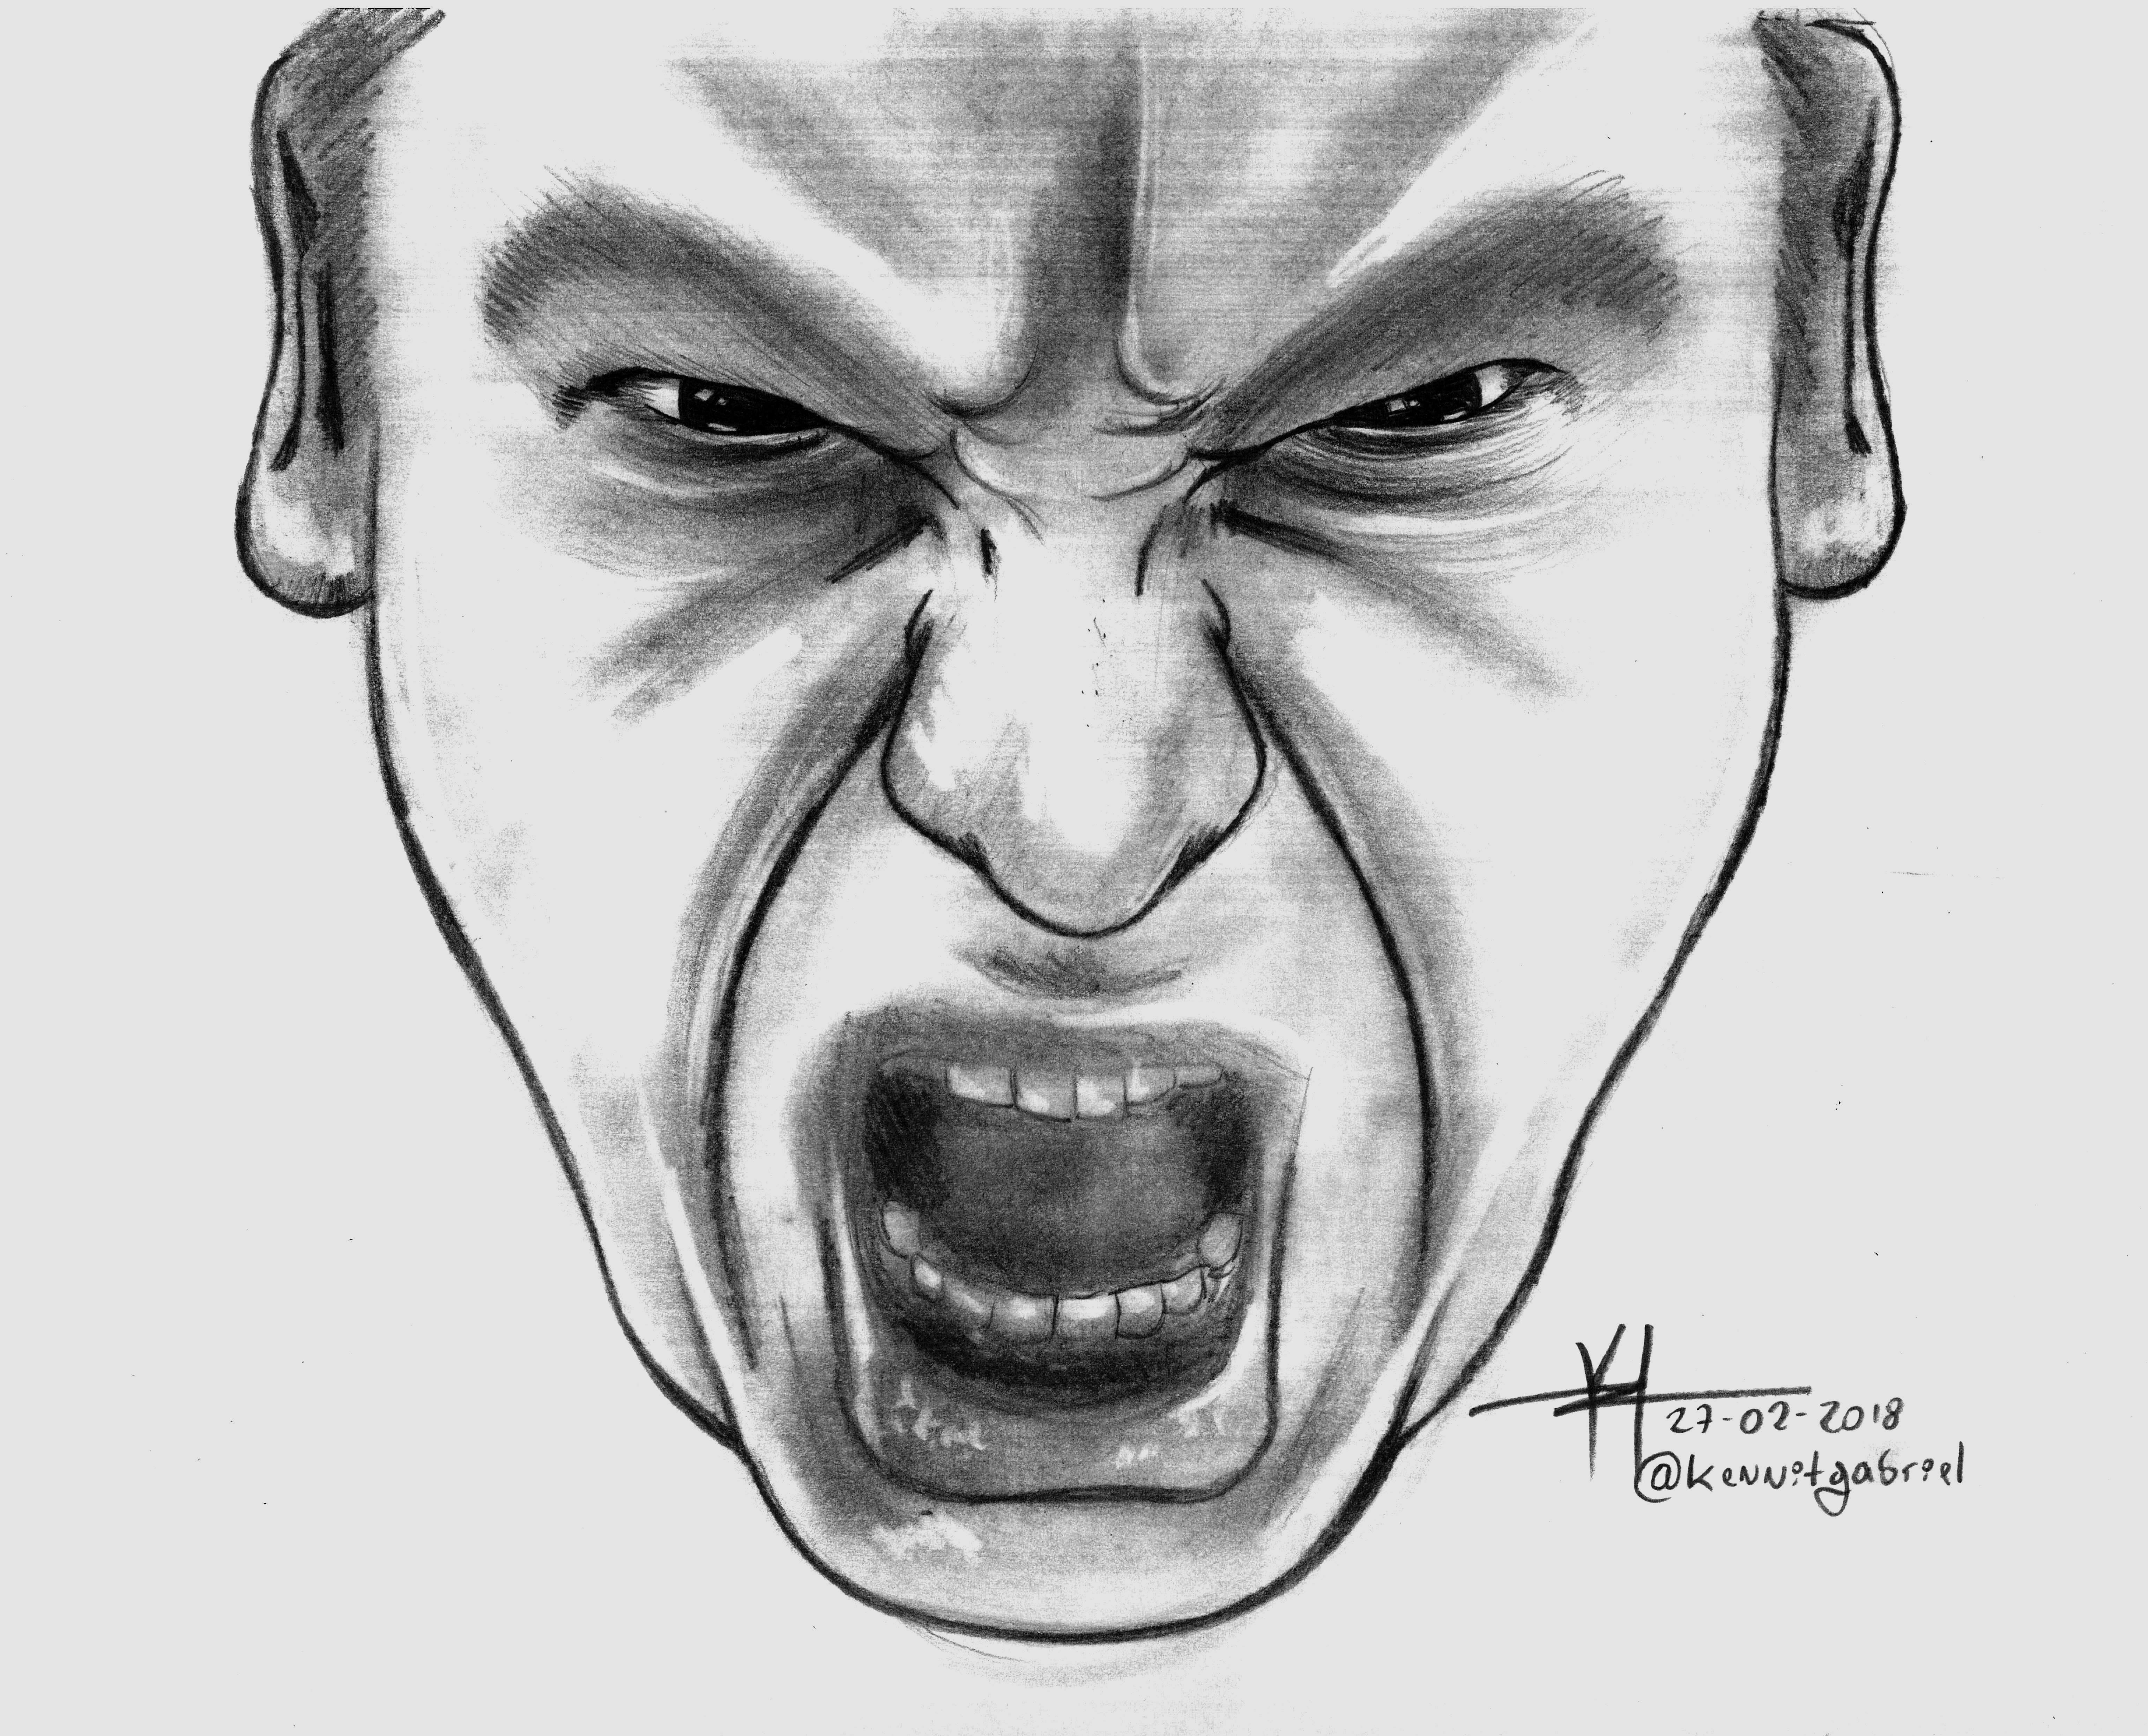 How To Draw An Angry Face, Step by Step, Drawing Guide, by Dawn - DragoArt